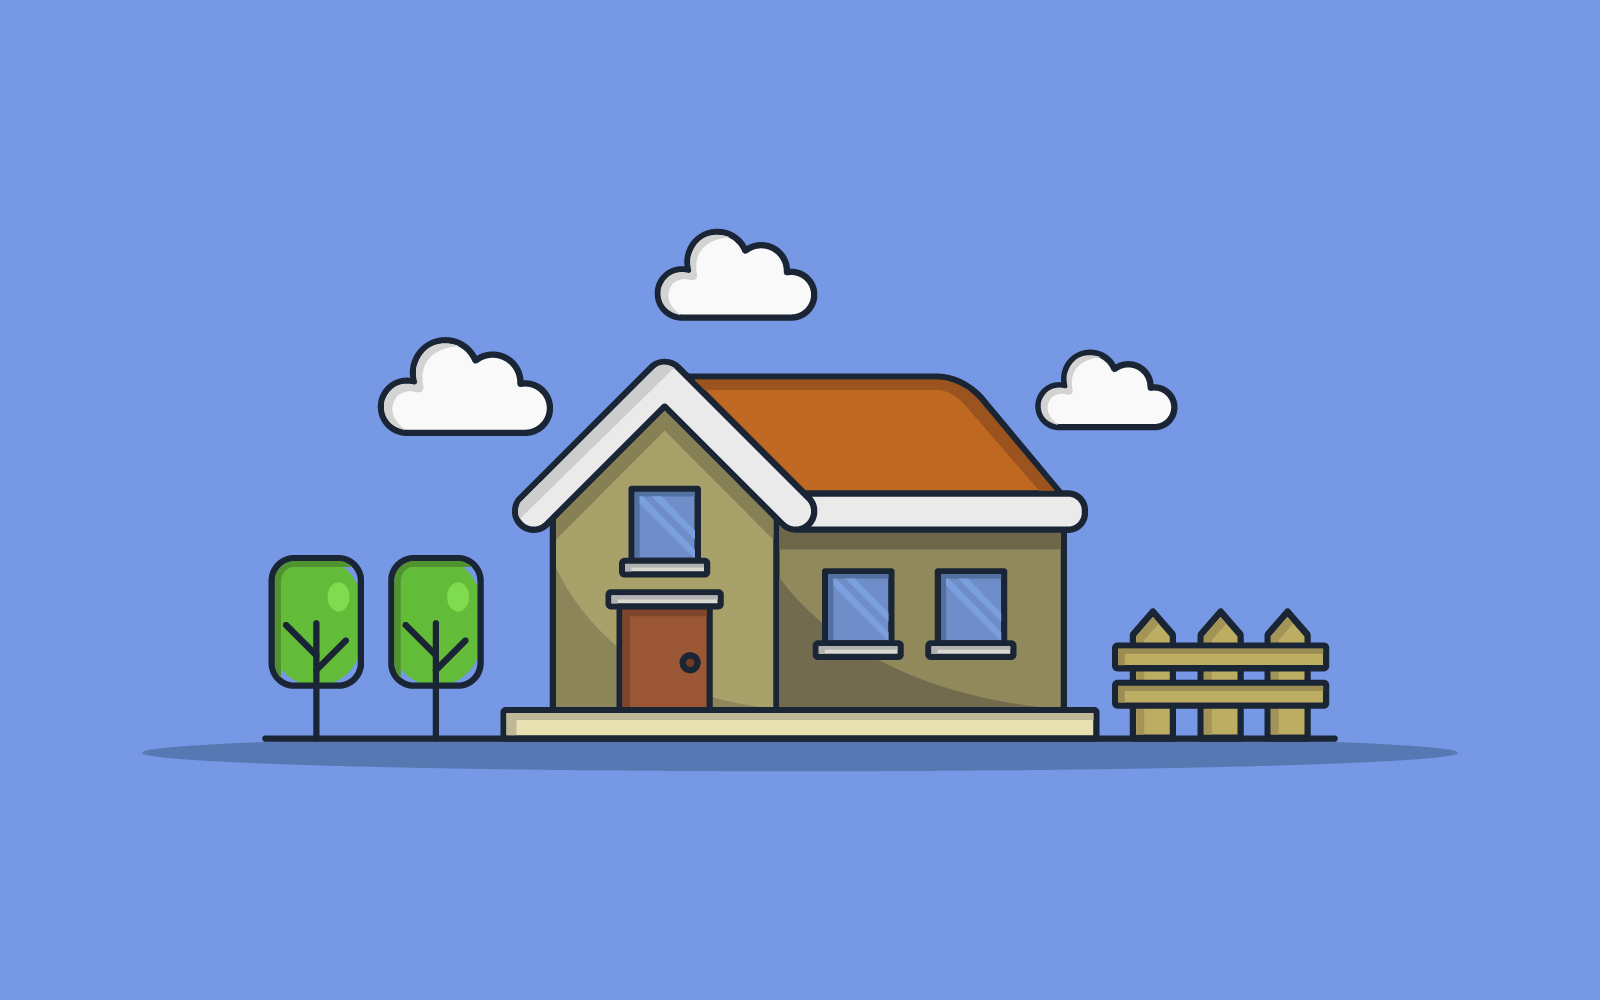 Vectorized illustrated house on white